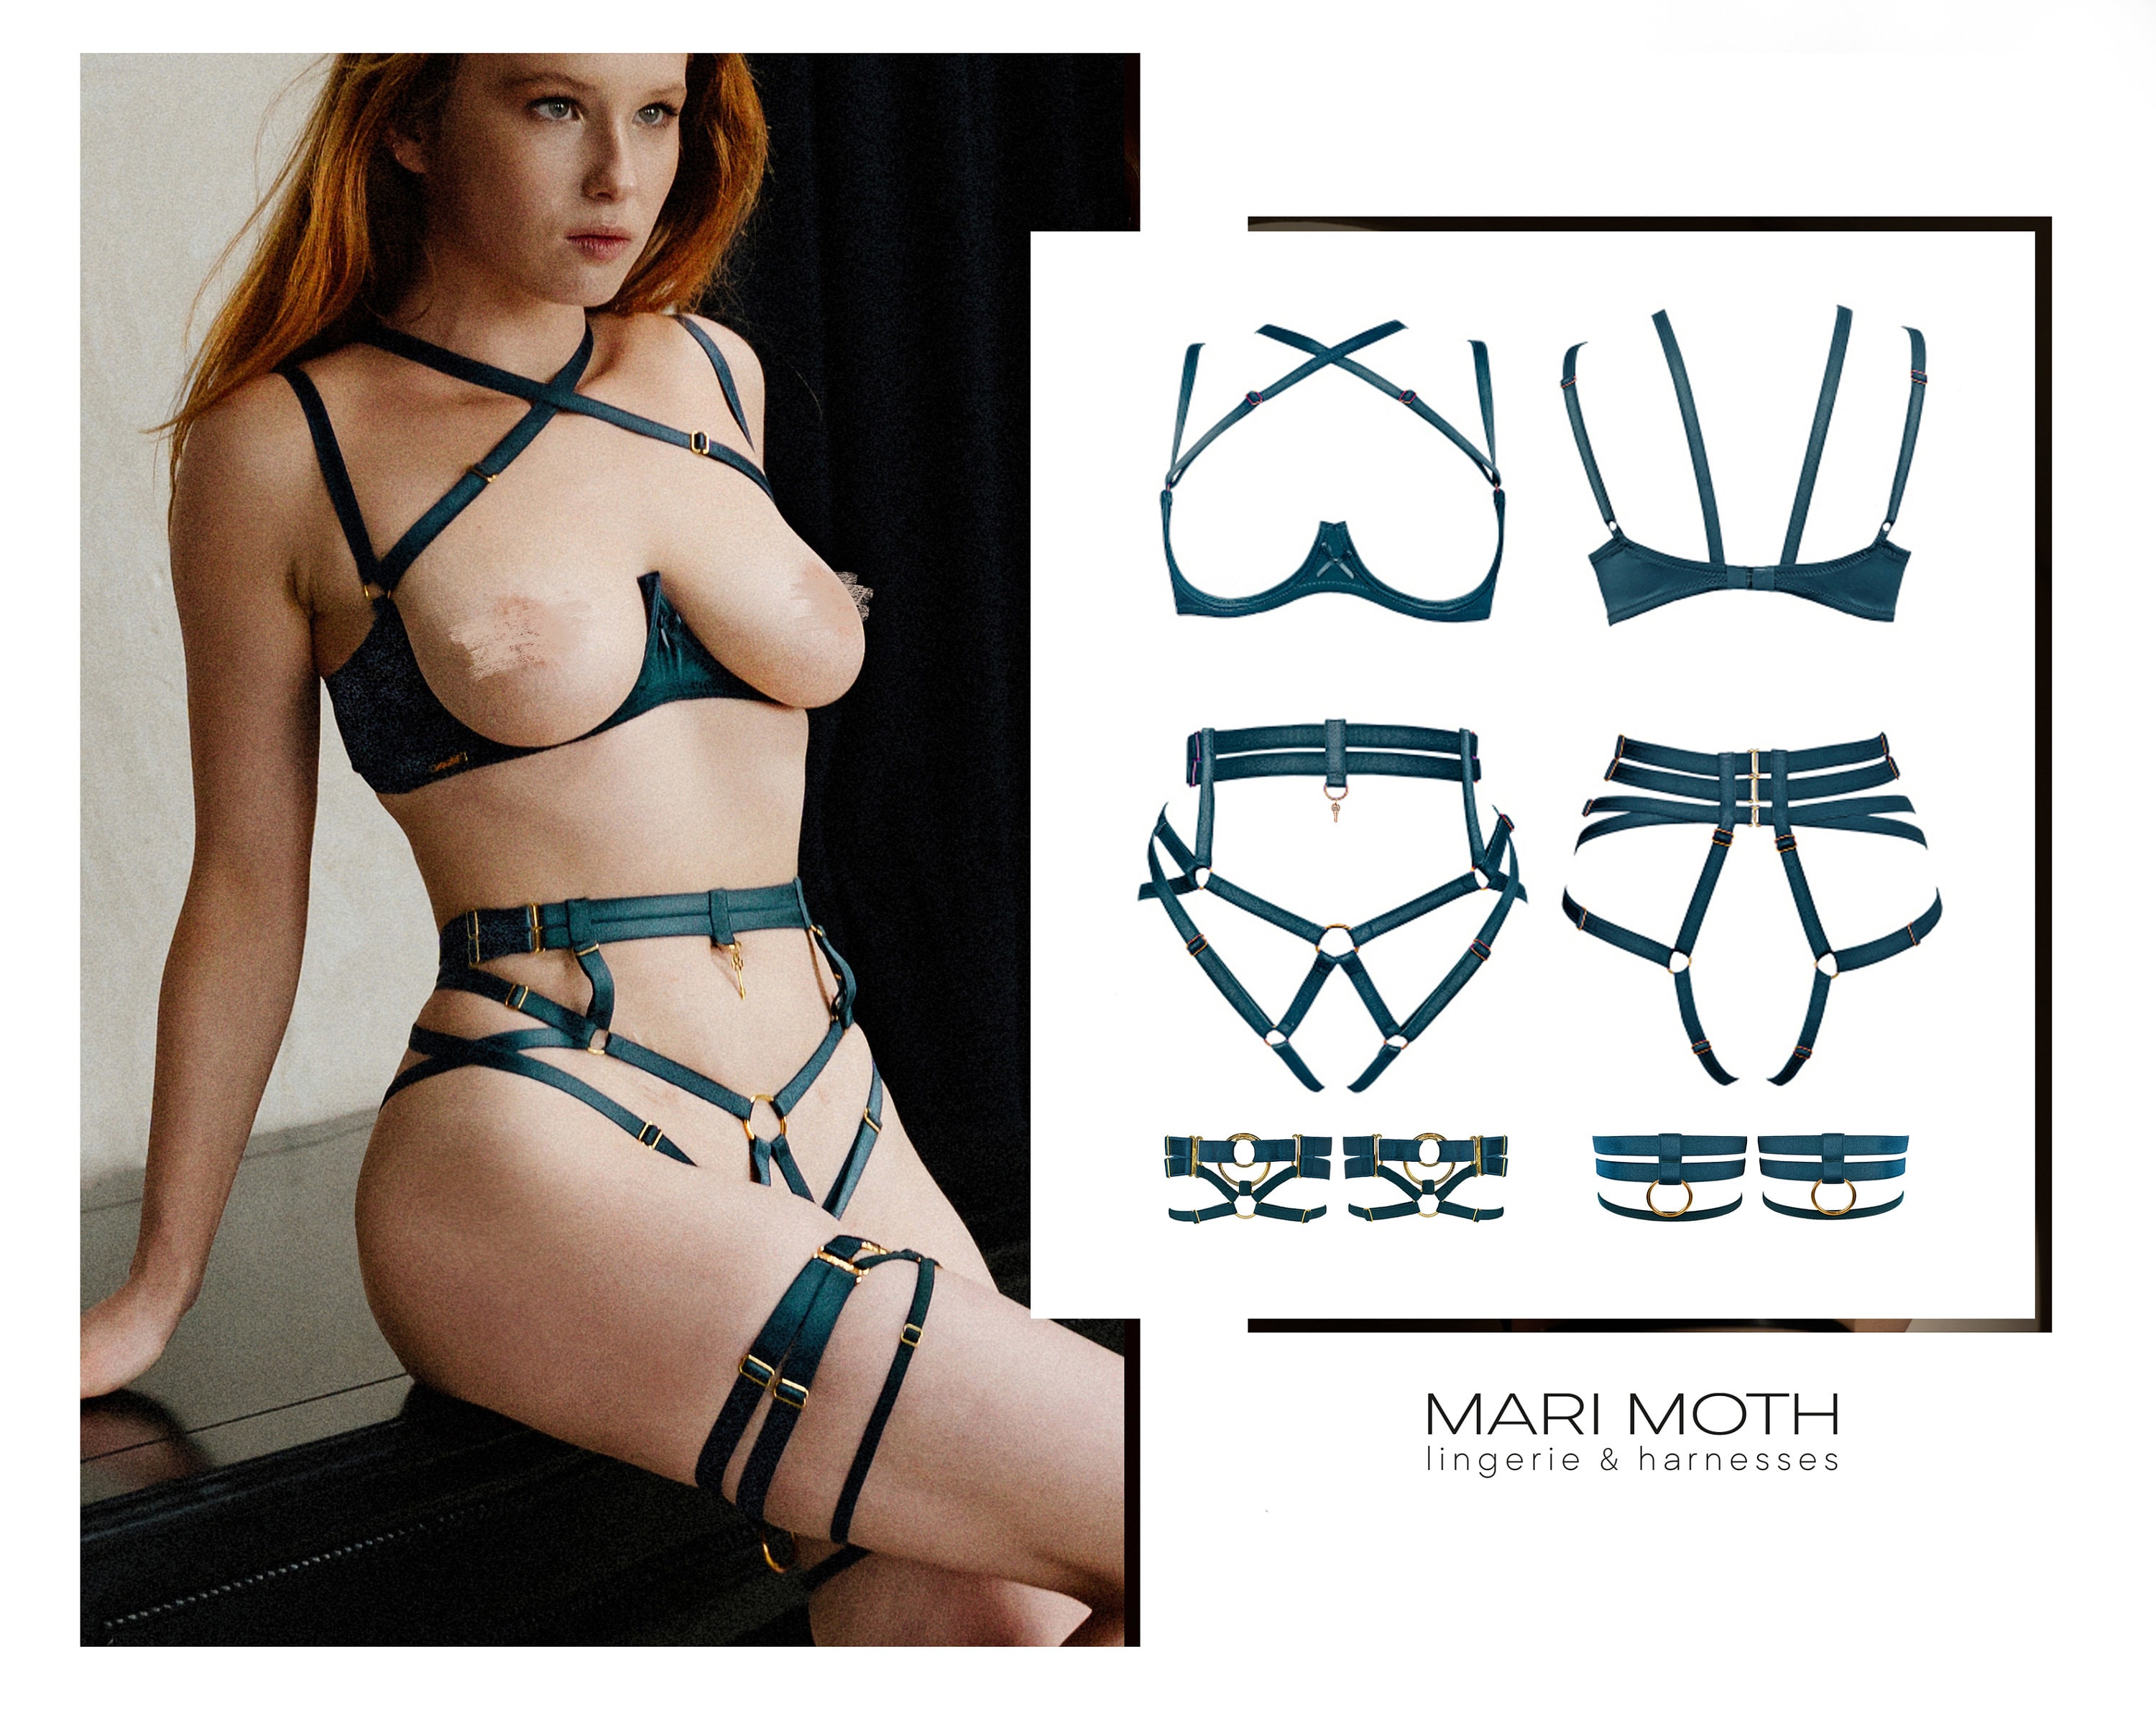 Stretch Braided Harness Set Crotchless Panties Cupless Top Cage Bra Open  Cup Bralette Bondage Lingerie BDSM -  UK